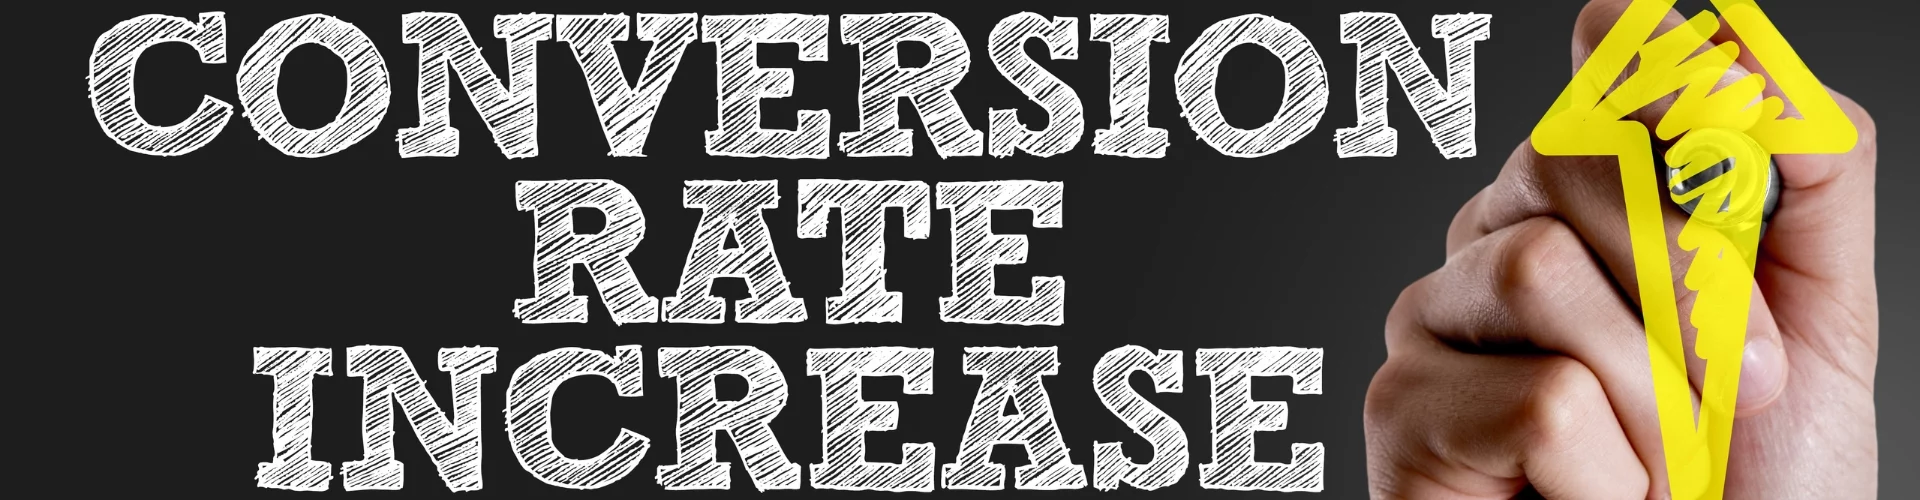 website-increases-conversion-rate